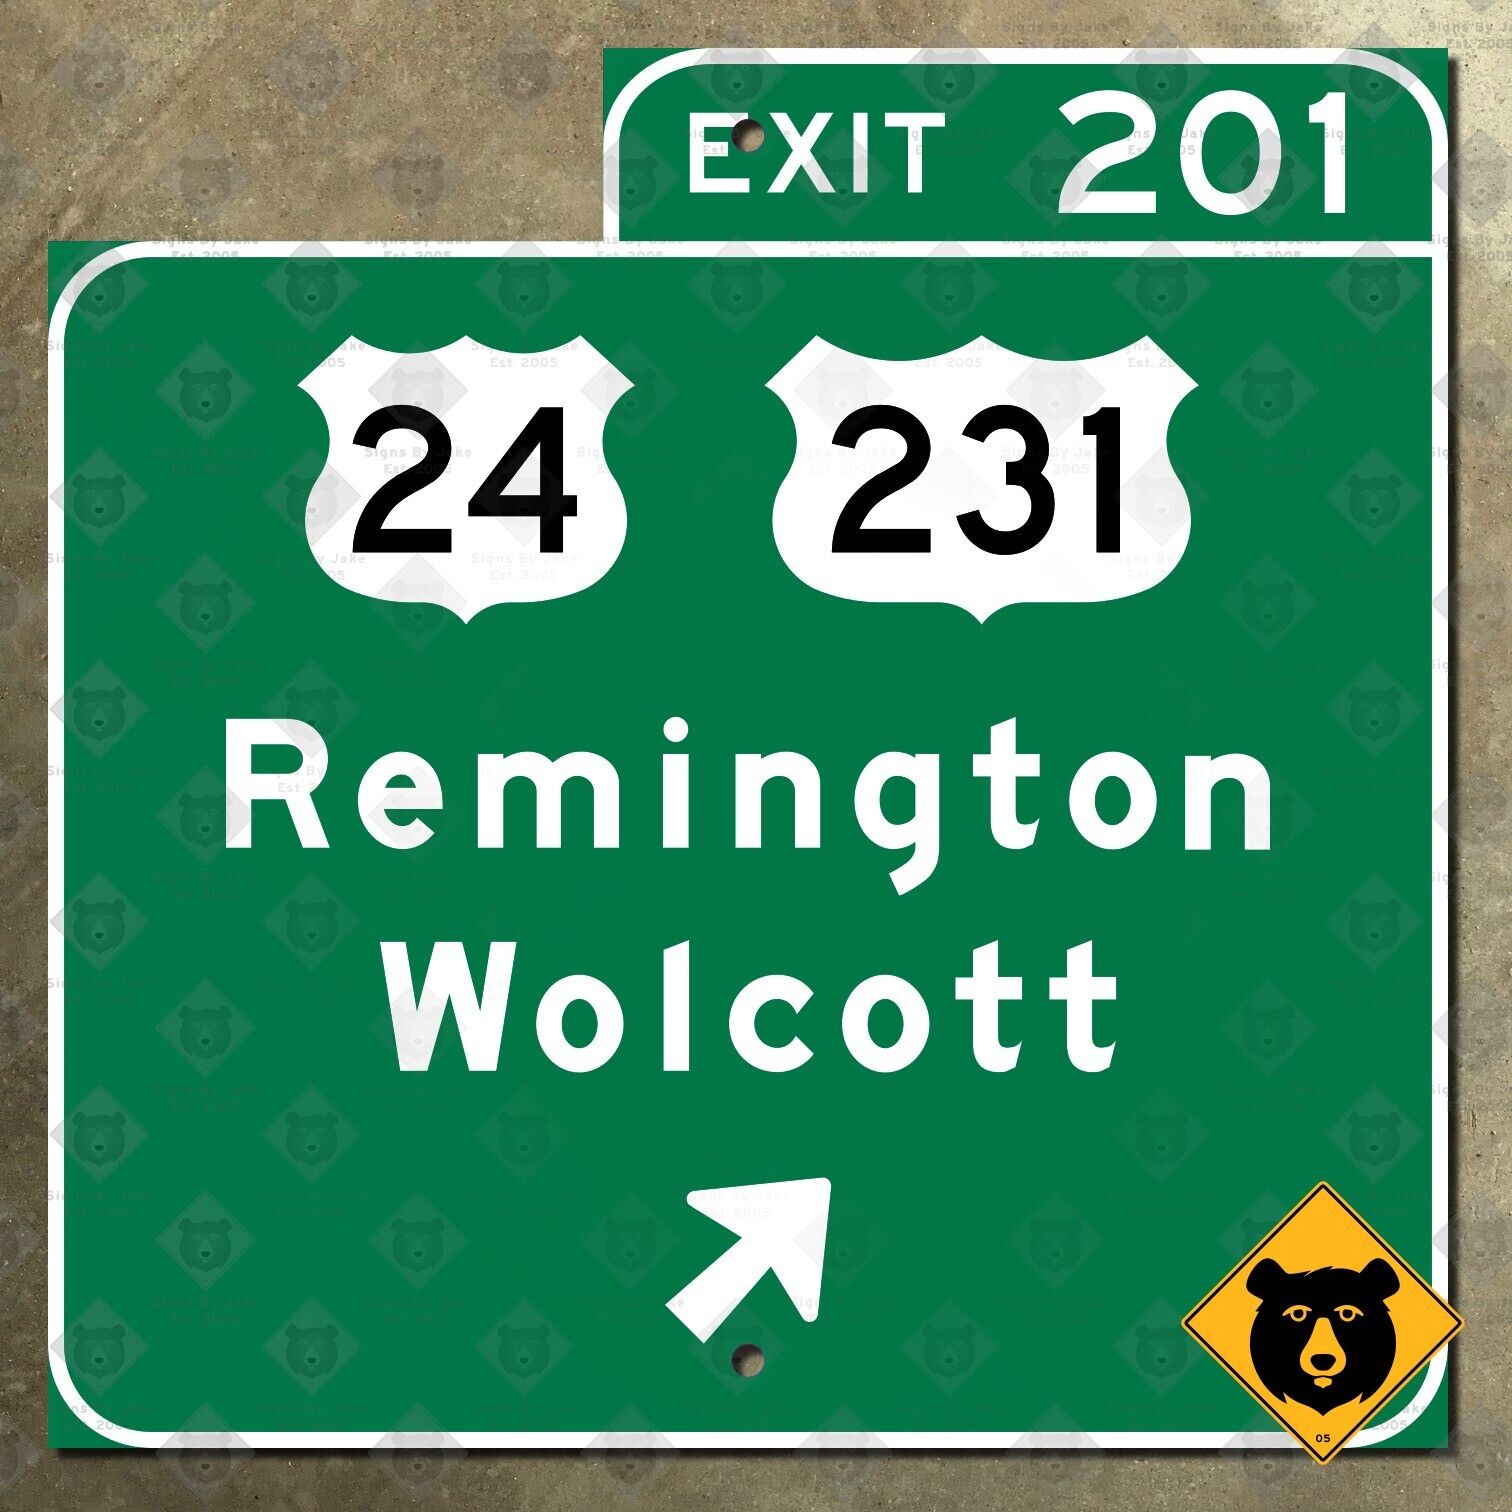 Indiana US route 24 231 Exit 201 Remington Wolcott guide sign road marker 12x12